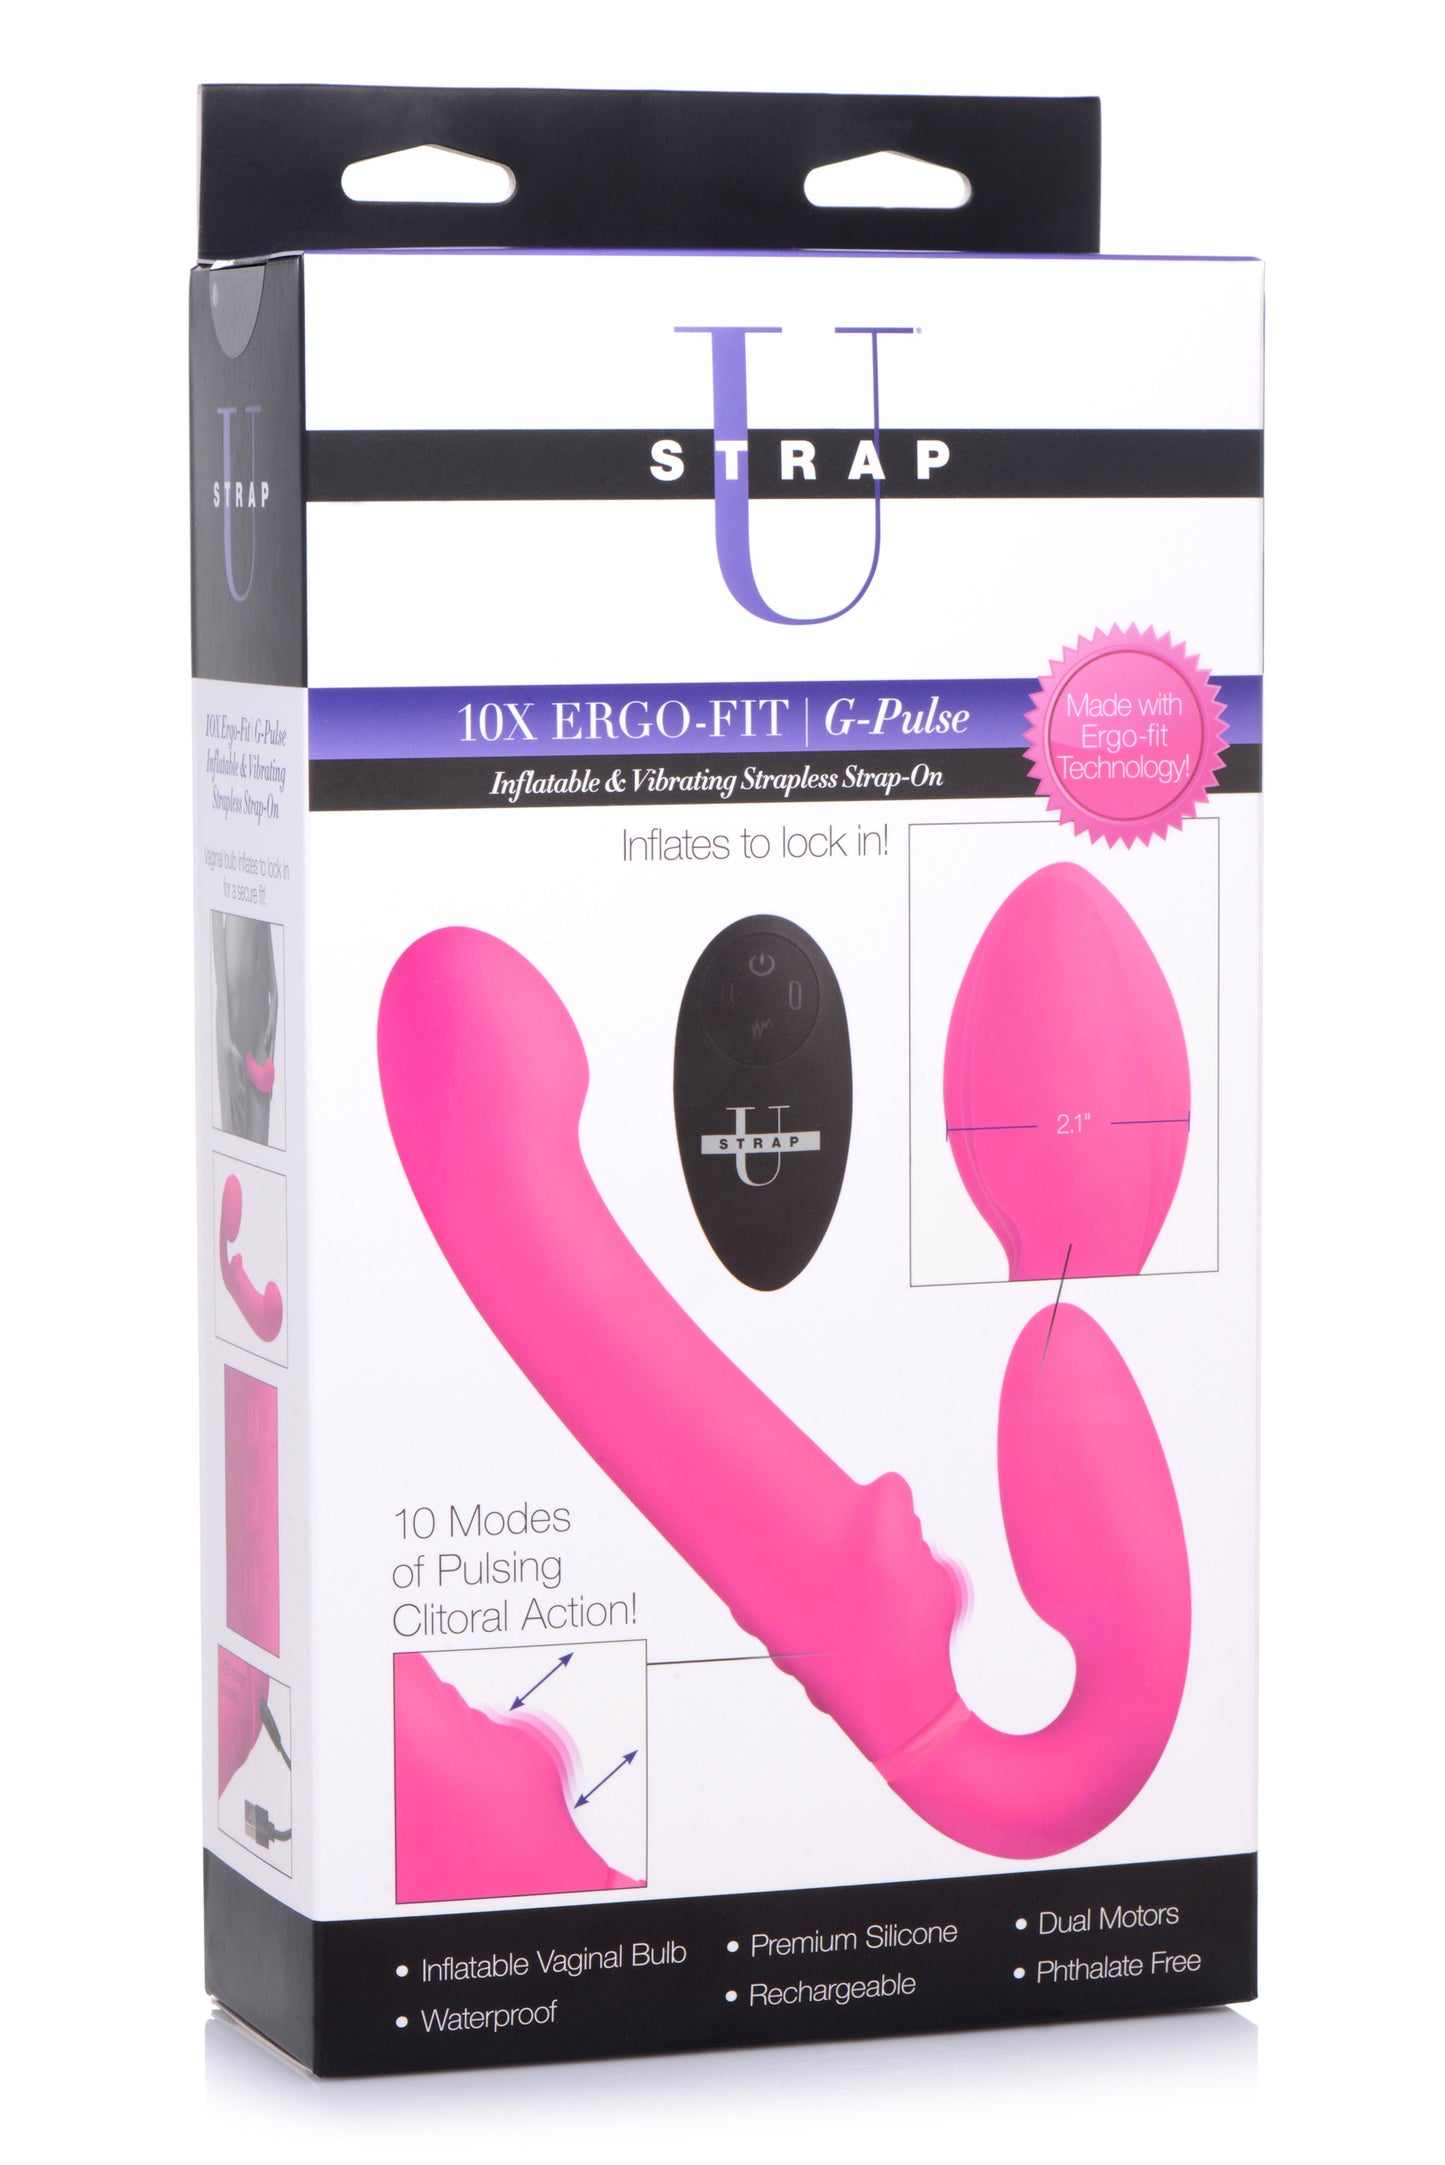 10X Remote Control Ergo-Fit G-Pulse Inflatable and Vibrating Strapless Strap-on - Pink - UABDSM